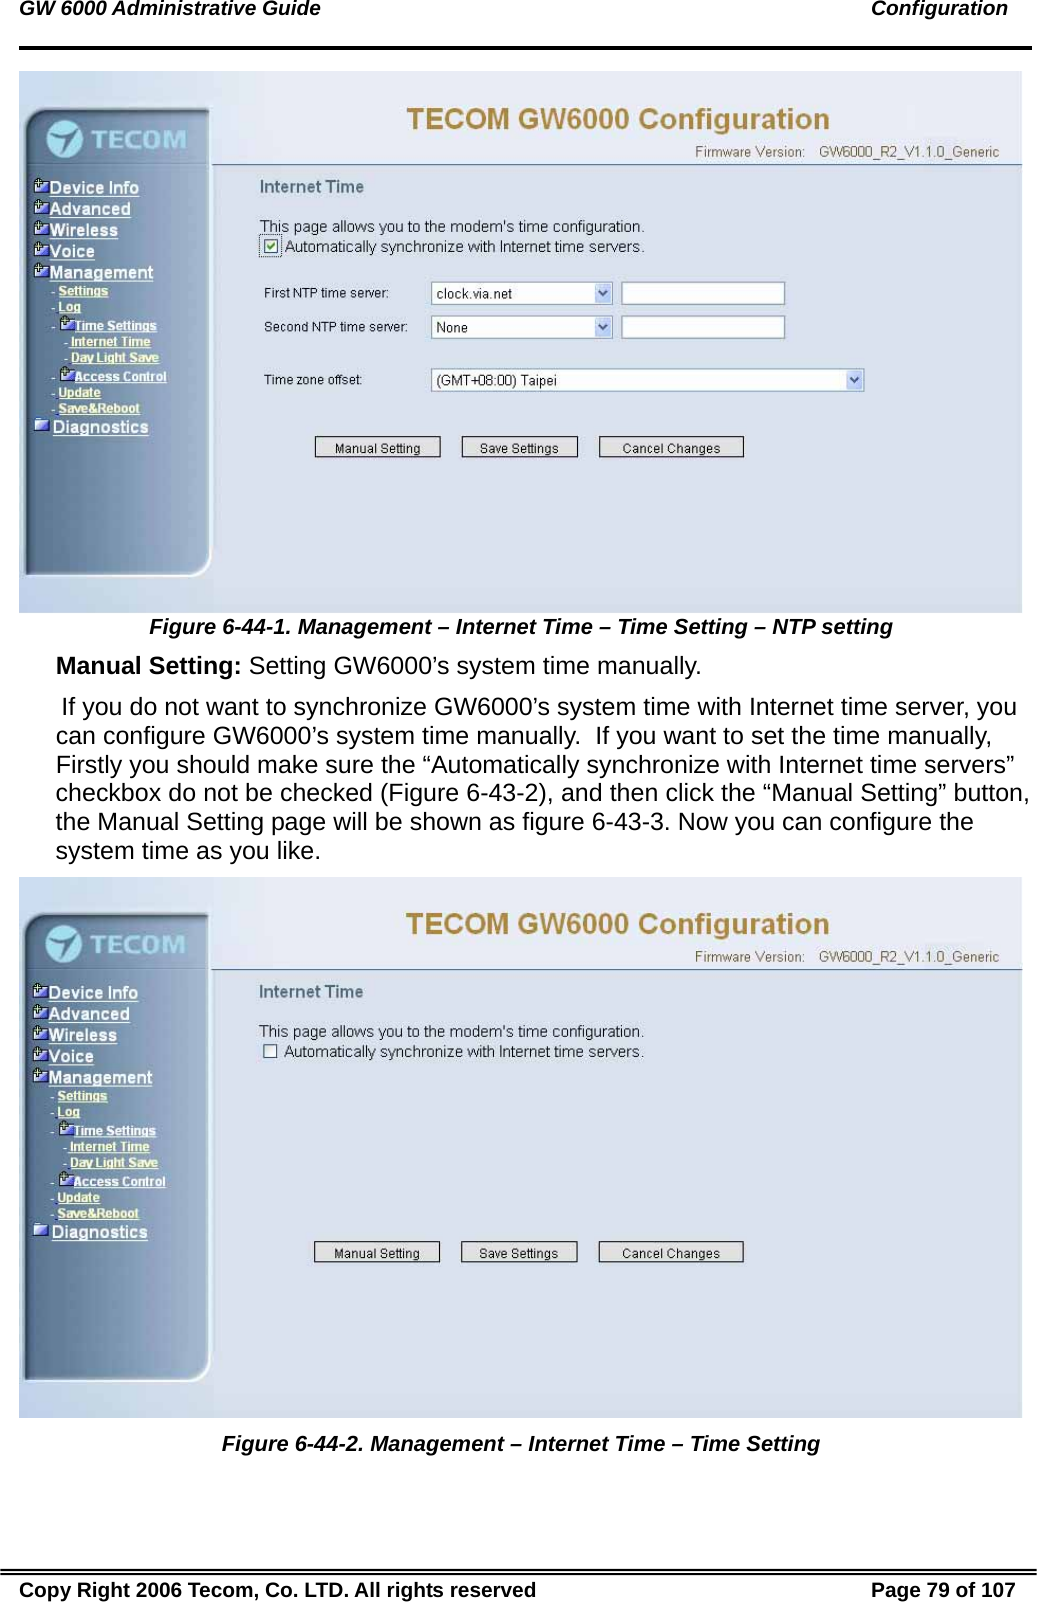 GW 6000 Administrative Guide                                                                                               Configuration  Figure 6-44-1. Management – Internet Time – Time Setting – NTP setting  Manual Setting: Setting GW6000’s system time manually.  If you do not want to synchronize GW6000’s system time with Internet time server, you can configure GW6000’s system time manually.  If you want to set the time manually, Firstly you should make sure the “Automatically synchronize with Internet time servers” checkbox do not be checked (Figure 6-43-2), and then click the “Manual Setting” button, the Manual Setting page will be shown as figure 6-43-3. Now you can configure the system time as you like.   Figure 6-44-2. Management – Internet Time – Time Setting Copy Right 2006 Tecom, Co. LTD. All rights reserved  Page 79 of 107 